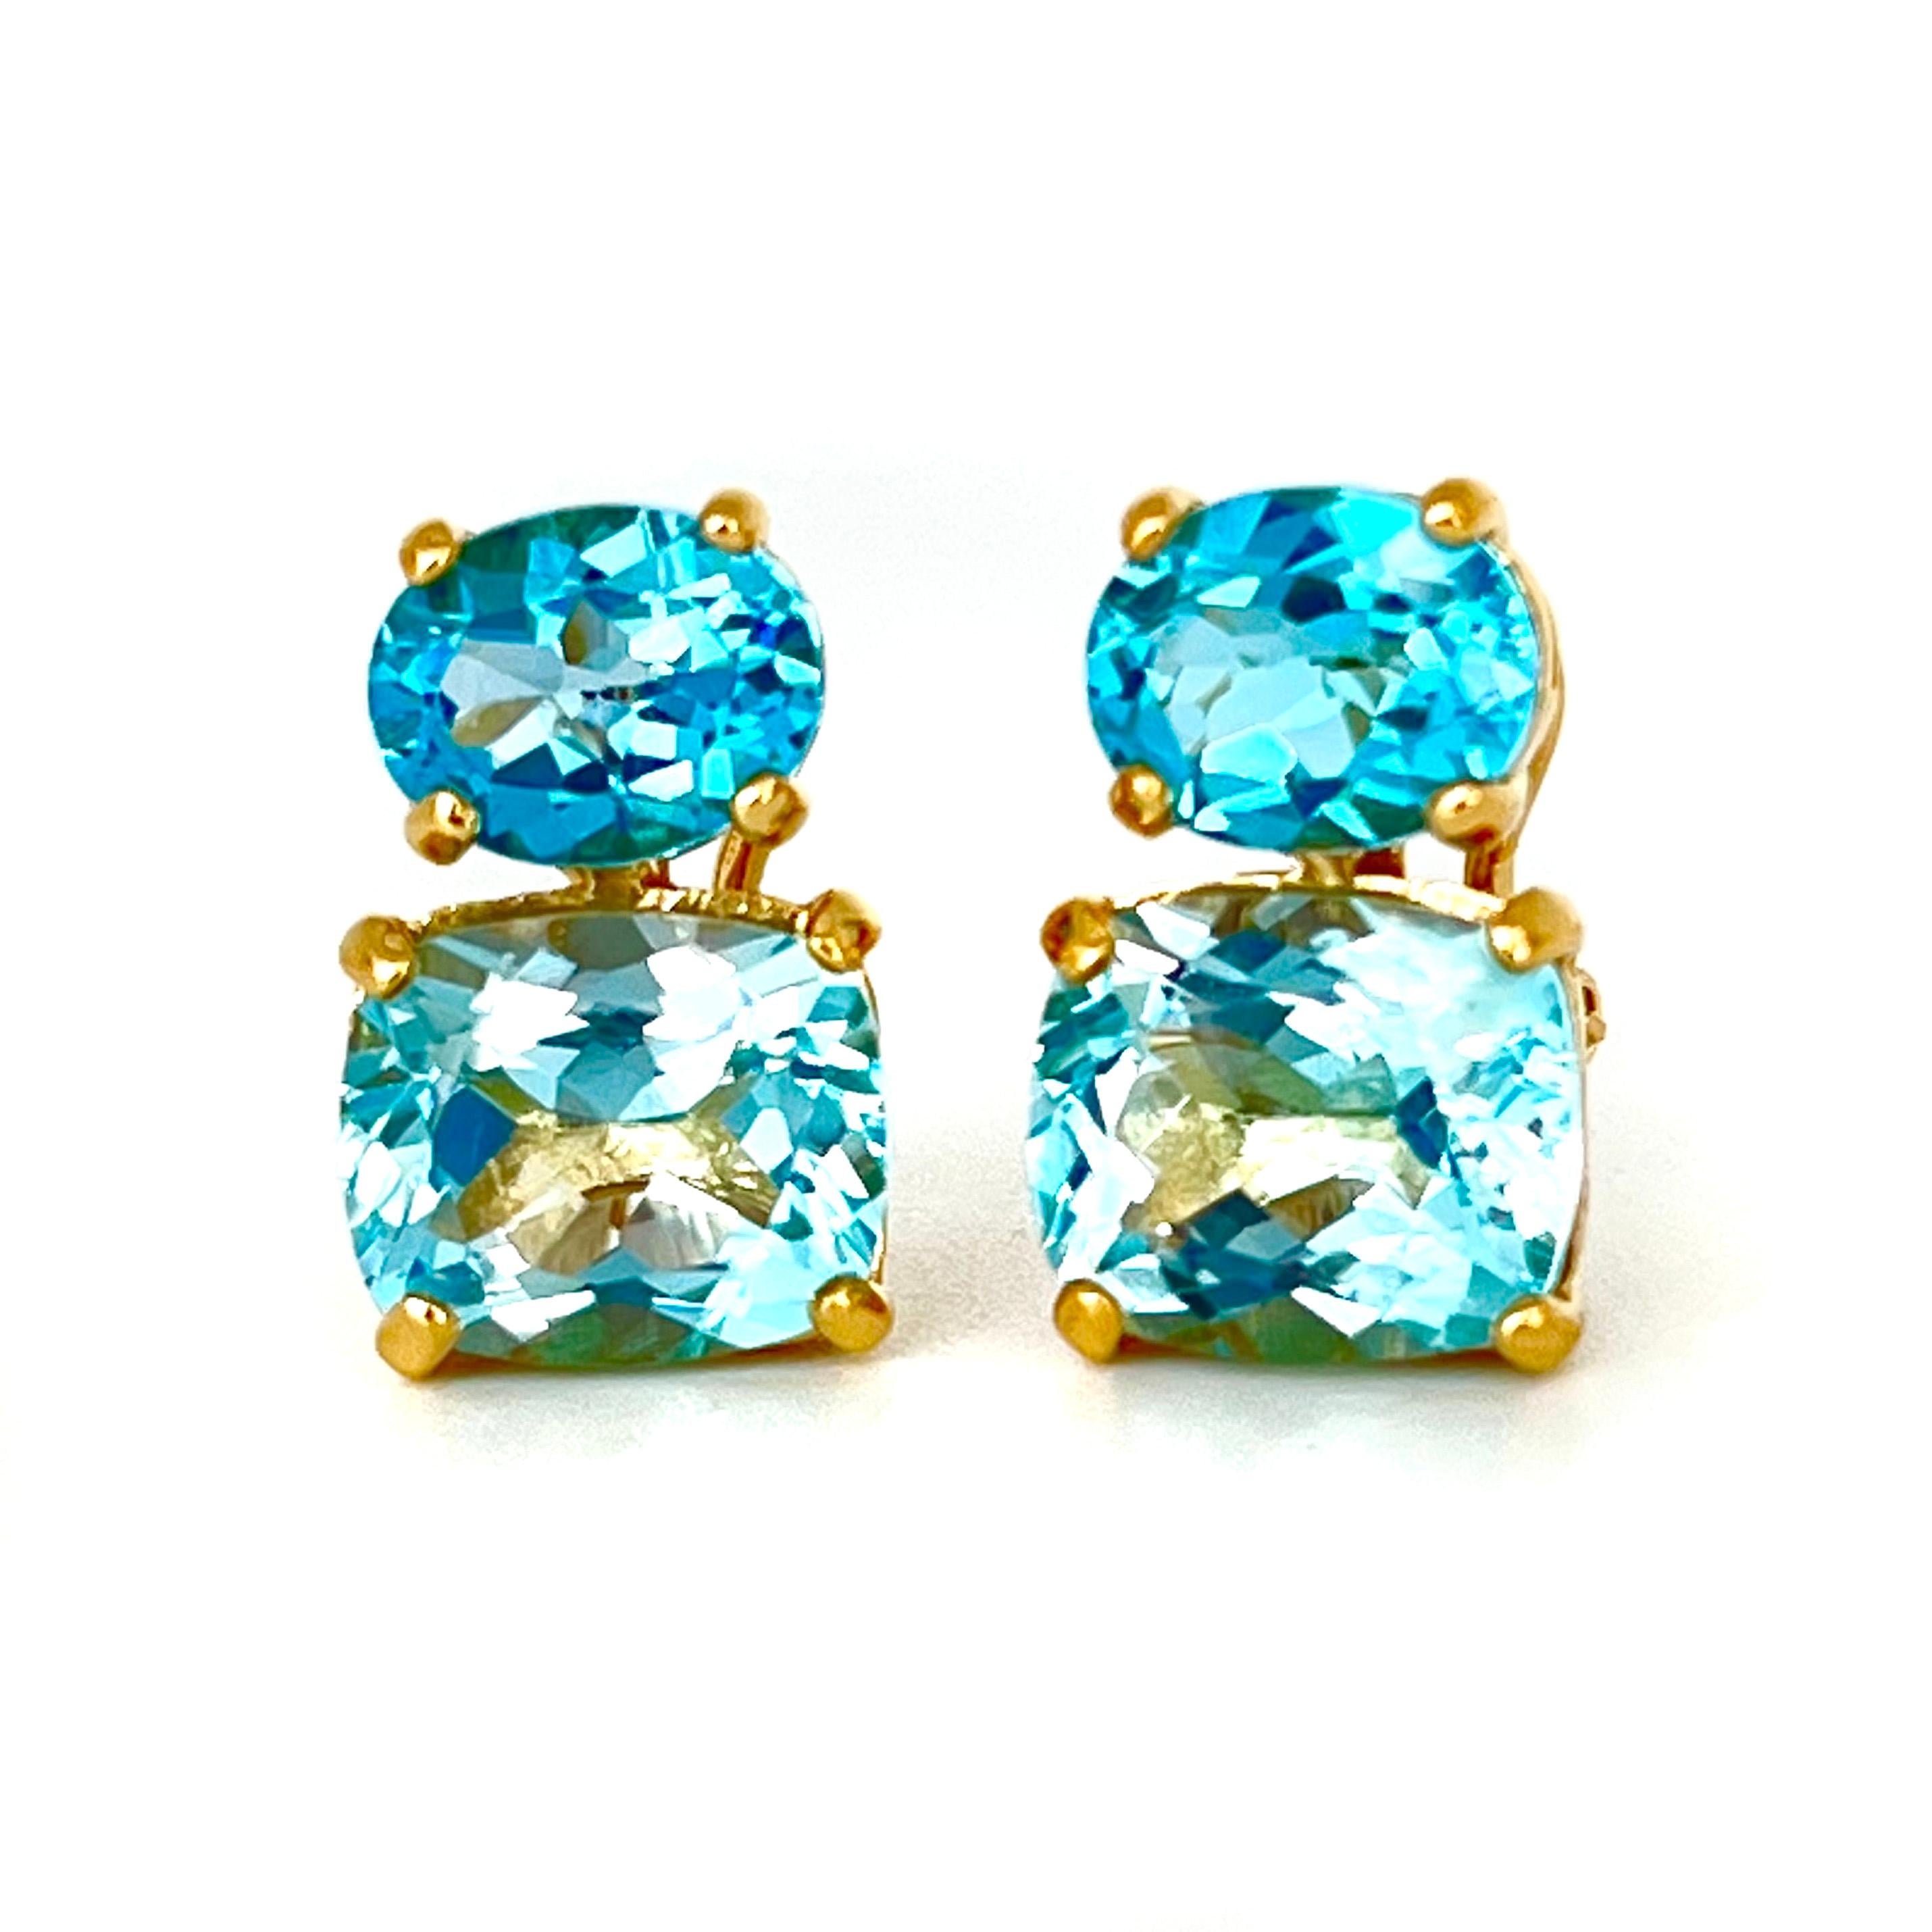 These stunning pair of earrings features a pair of genuine oval Swiss blue topaz with cushion-cut sky blue topaz, handset in 18k yellow gold vermeil over sterling silver. The double blue combination creates stunning two-tone blue hue! They are just